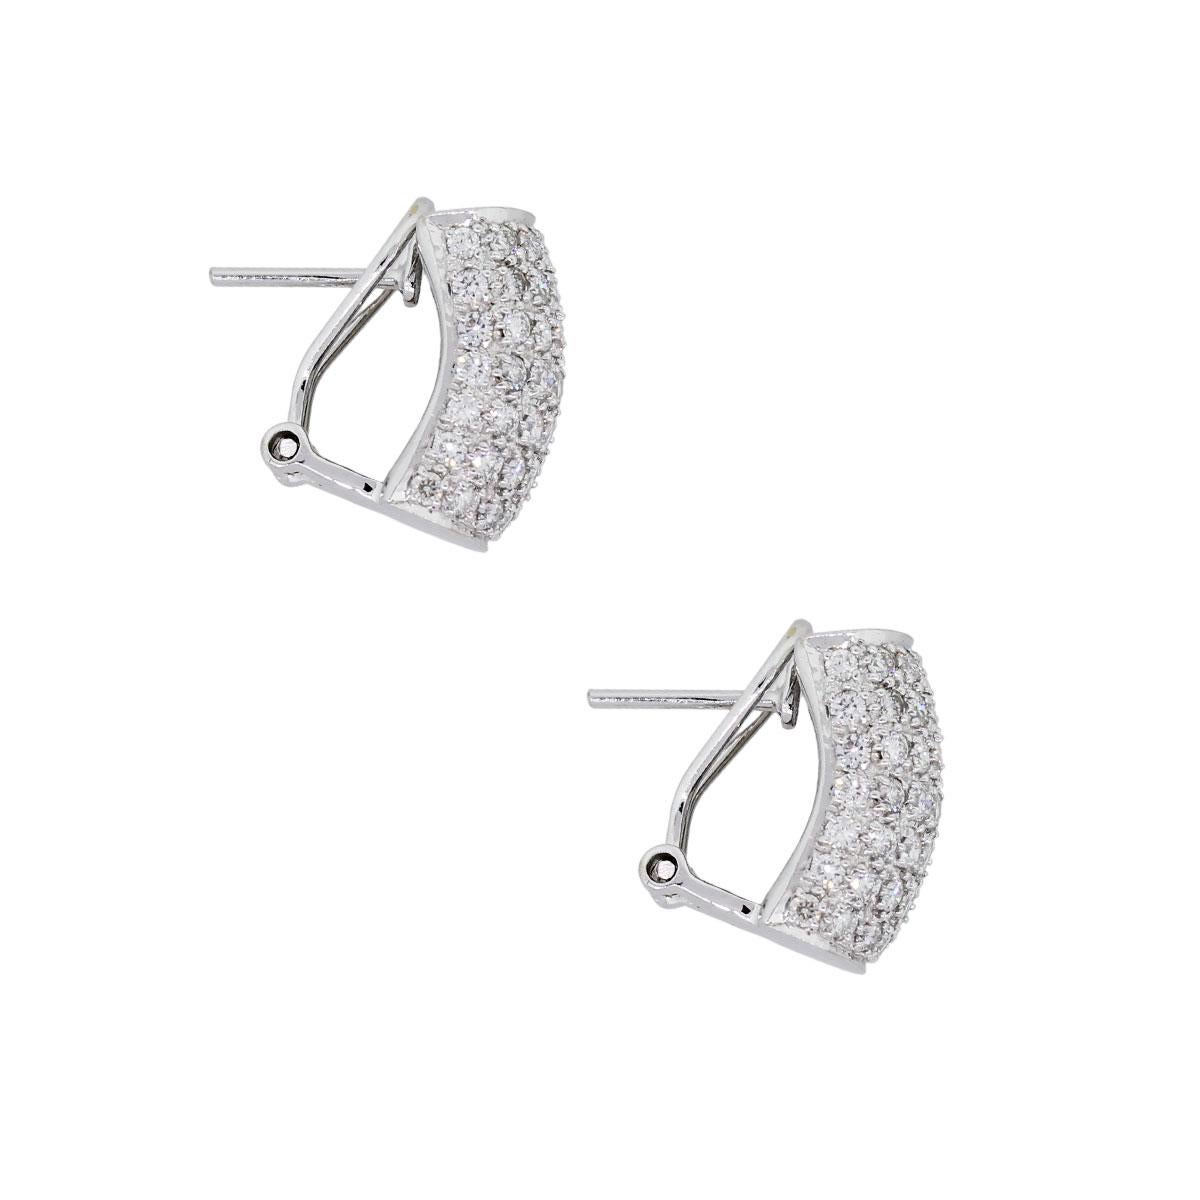 Material: 18k white gold
Diamond Details: Approx. 1.47ctw of round diamonds. Diamond color is G/H and SI clarity.
Measurements: 0.61″ x 0.38″ x 0.48″
Earring Backs: Omega back
Total Weight: 8.3g (5.3dwt)
Additional Details: This item comes with a